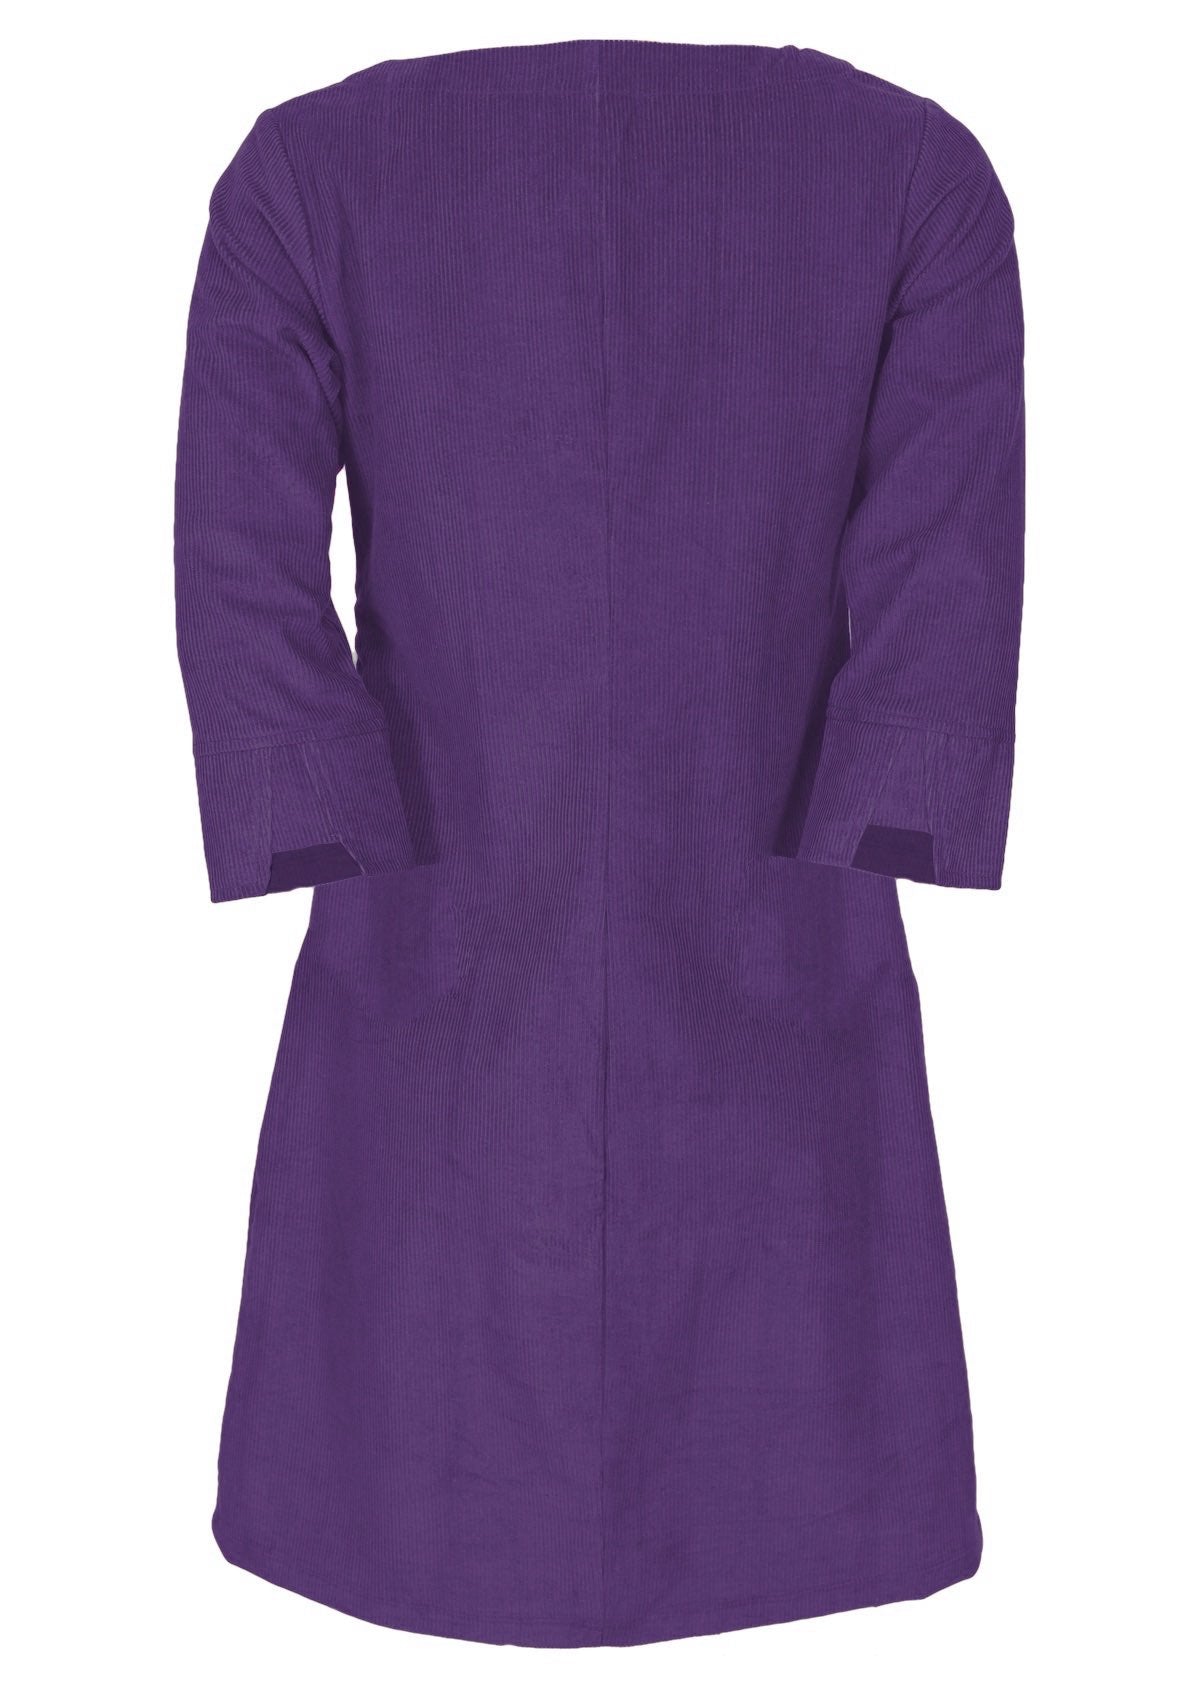 Purple corduroy dress has pockets and detailed cuffs. 